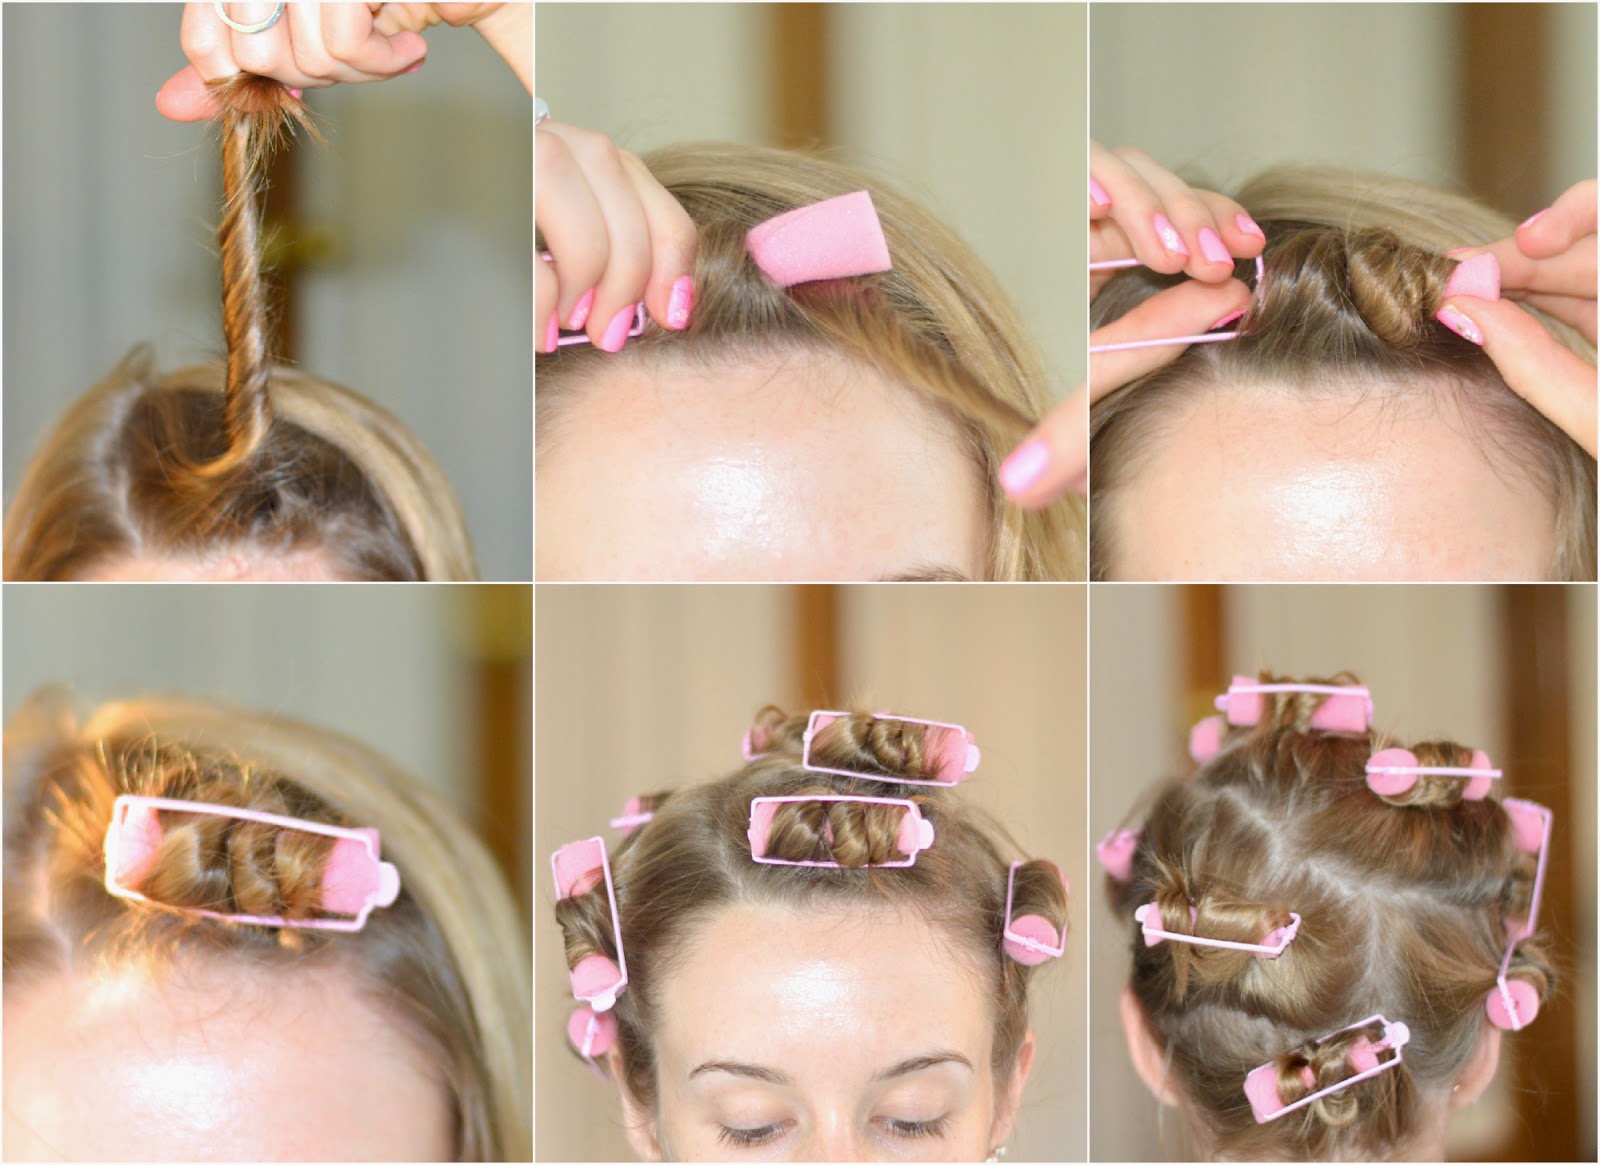 The Lazy Blowout: How to Hot Roll Your Hair | Blowout hair, Hot rollers hair,  Hair rollers tutorial